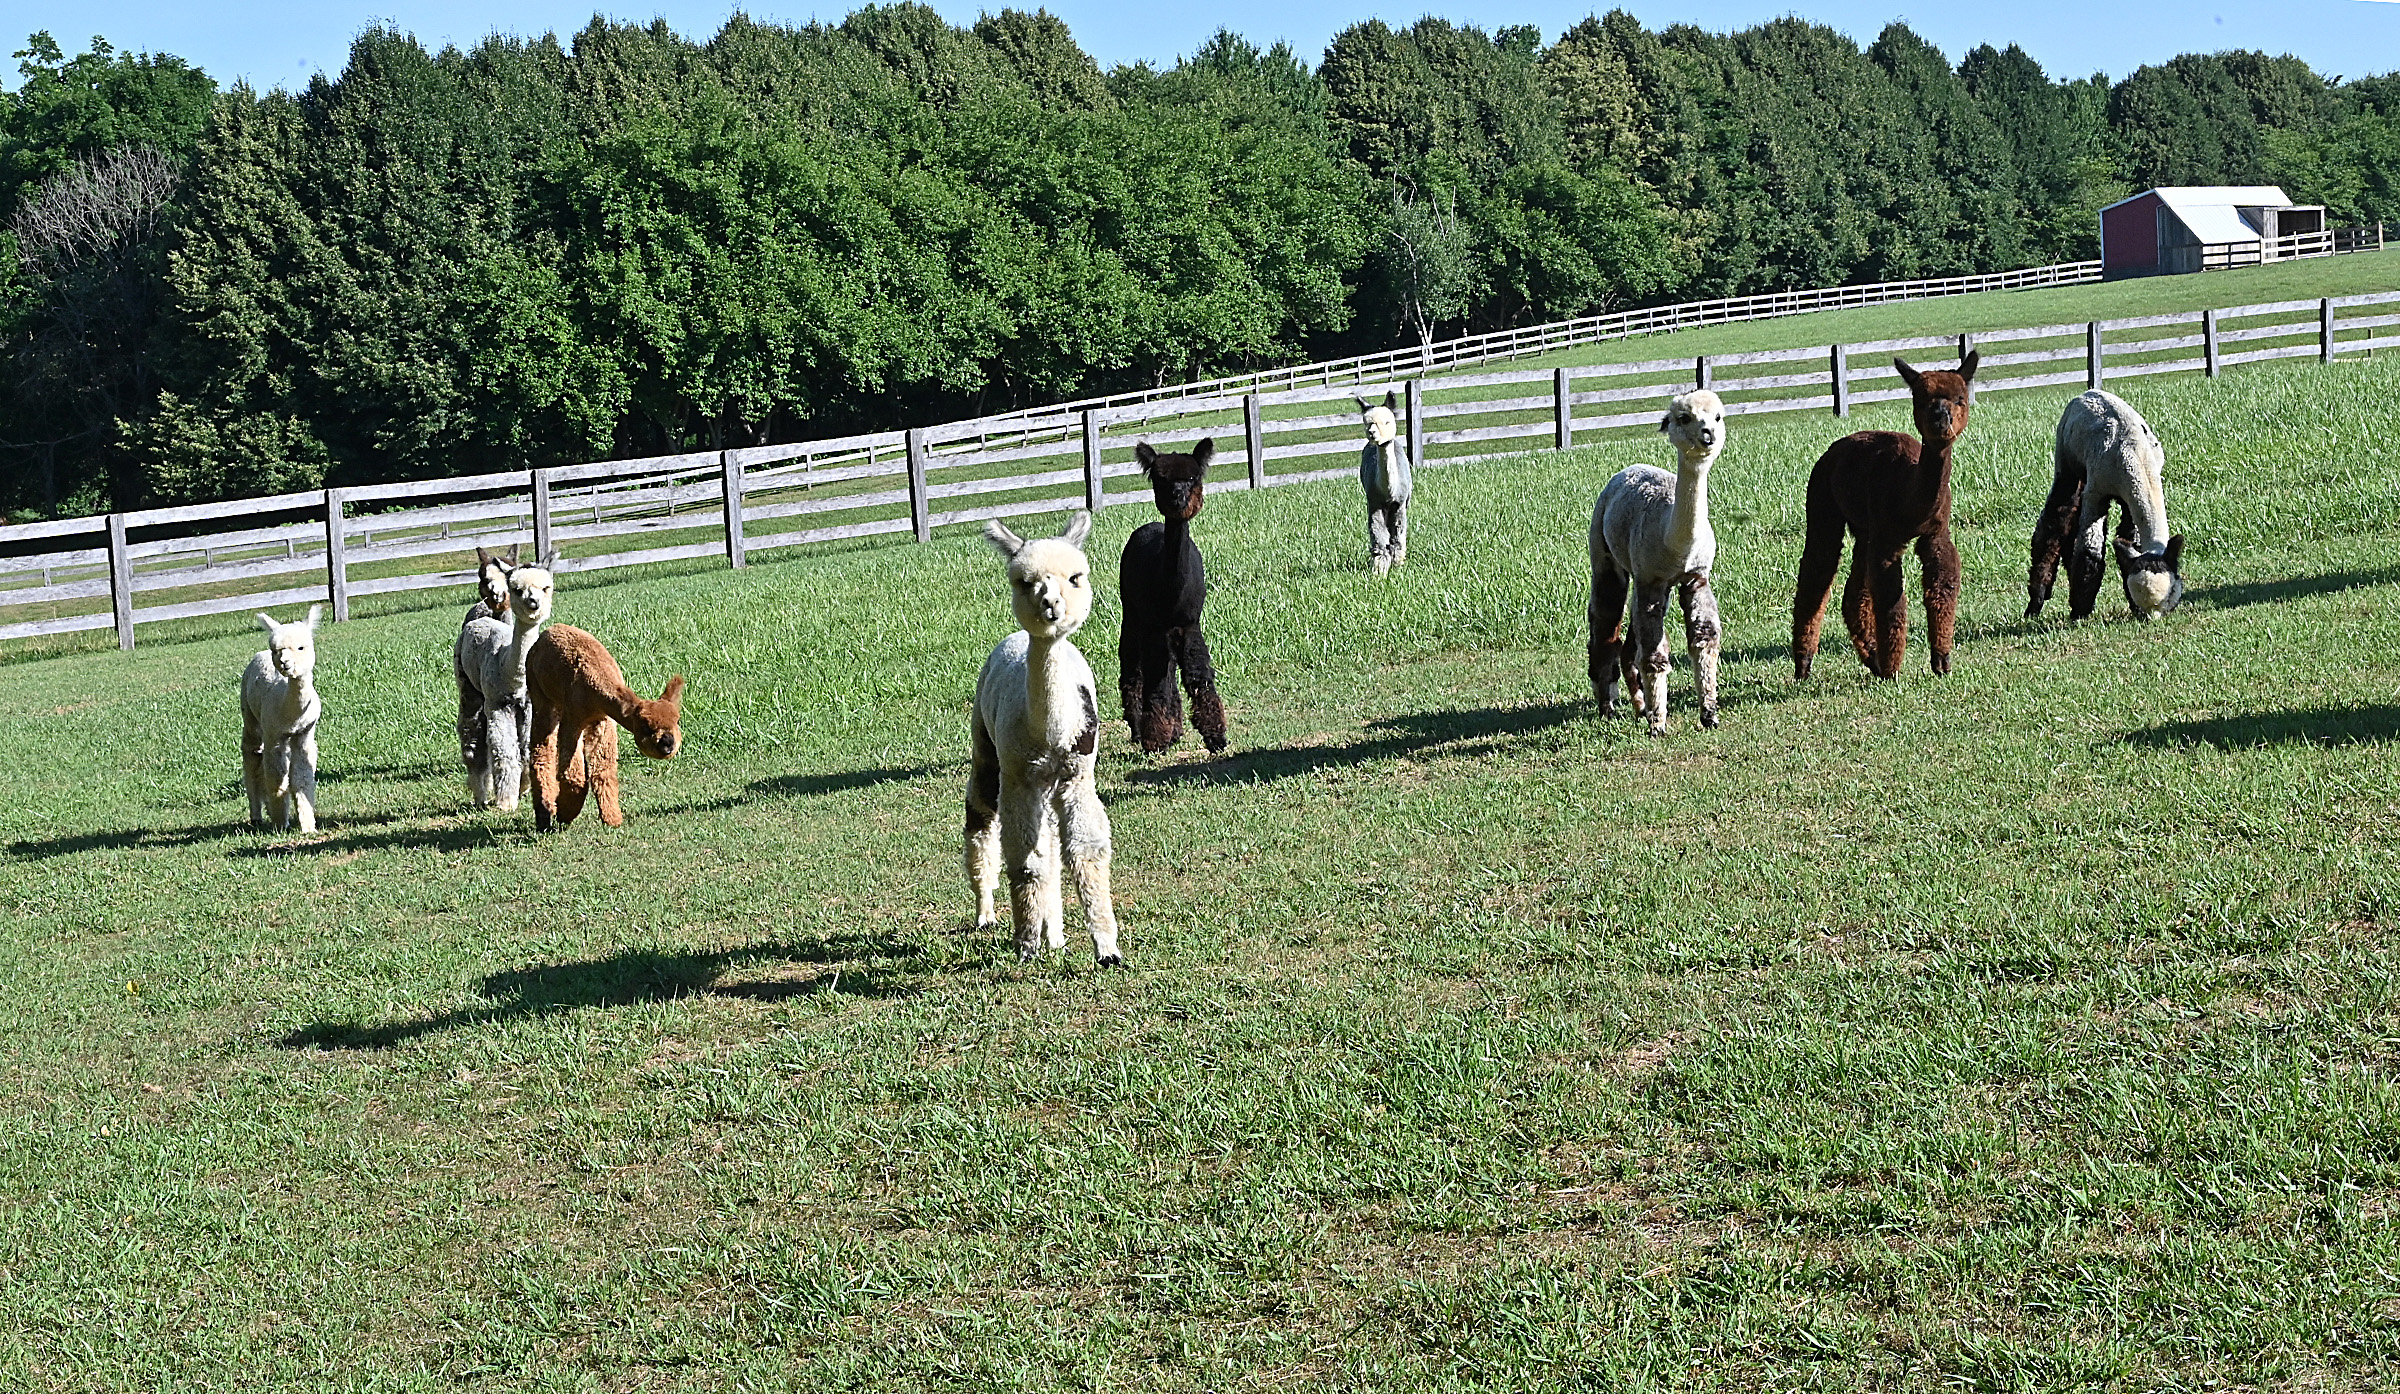 Some of the 115 Alpacas in one of the several yards at Black Barn Alpacas in Finksburg. The farm is owned and operated by Travis and Yussy McManus. (Jeffrey F. Bill/Staff photo)